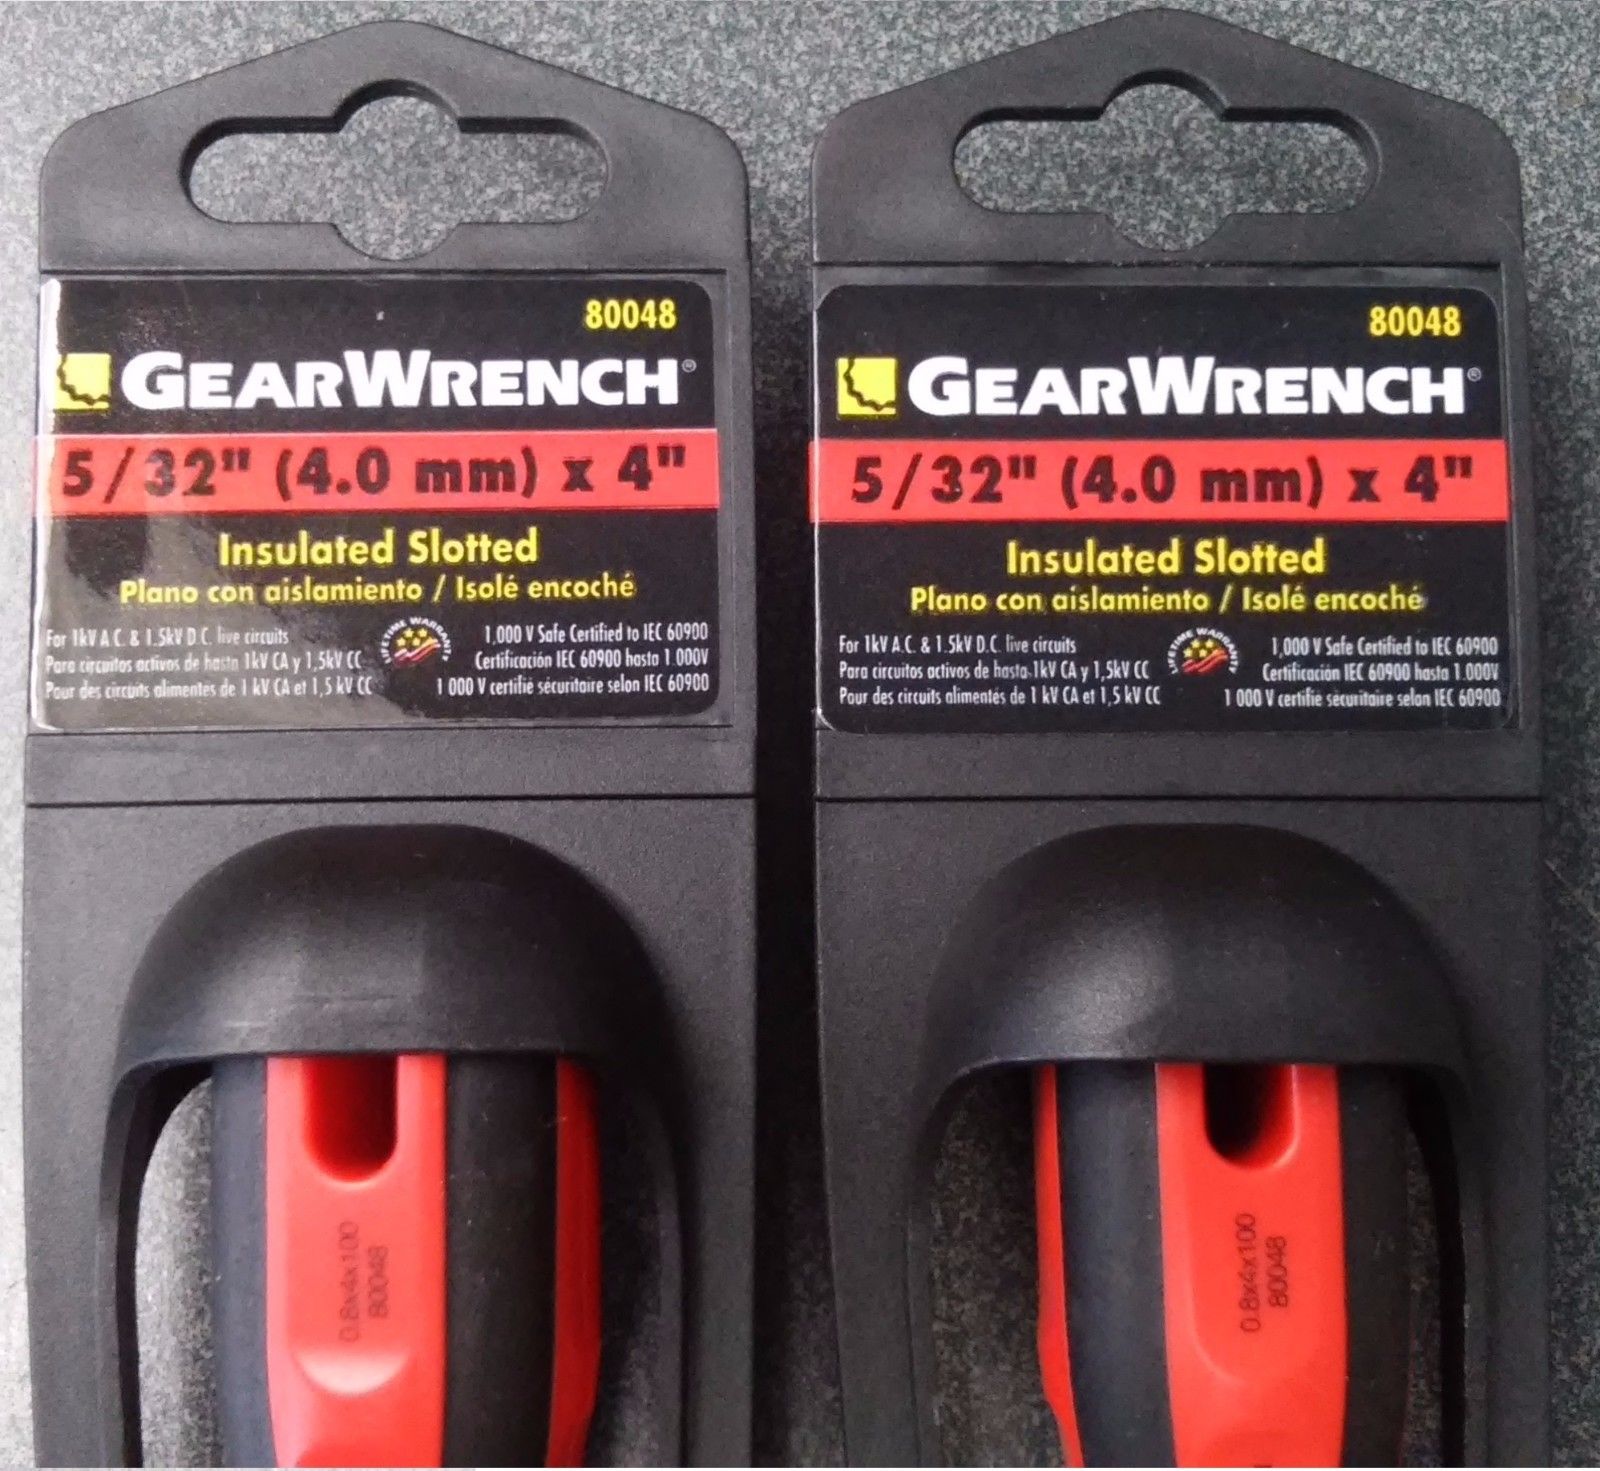 Gearwrench 80048 5/32" 4.0mm x 4" Slotted Screwdriver 2pcs